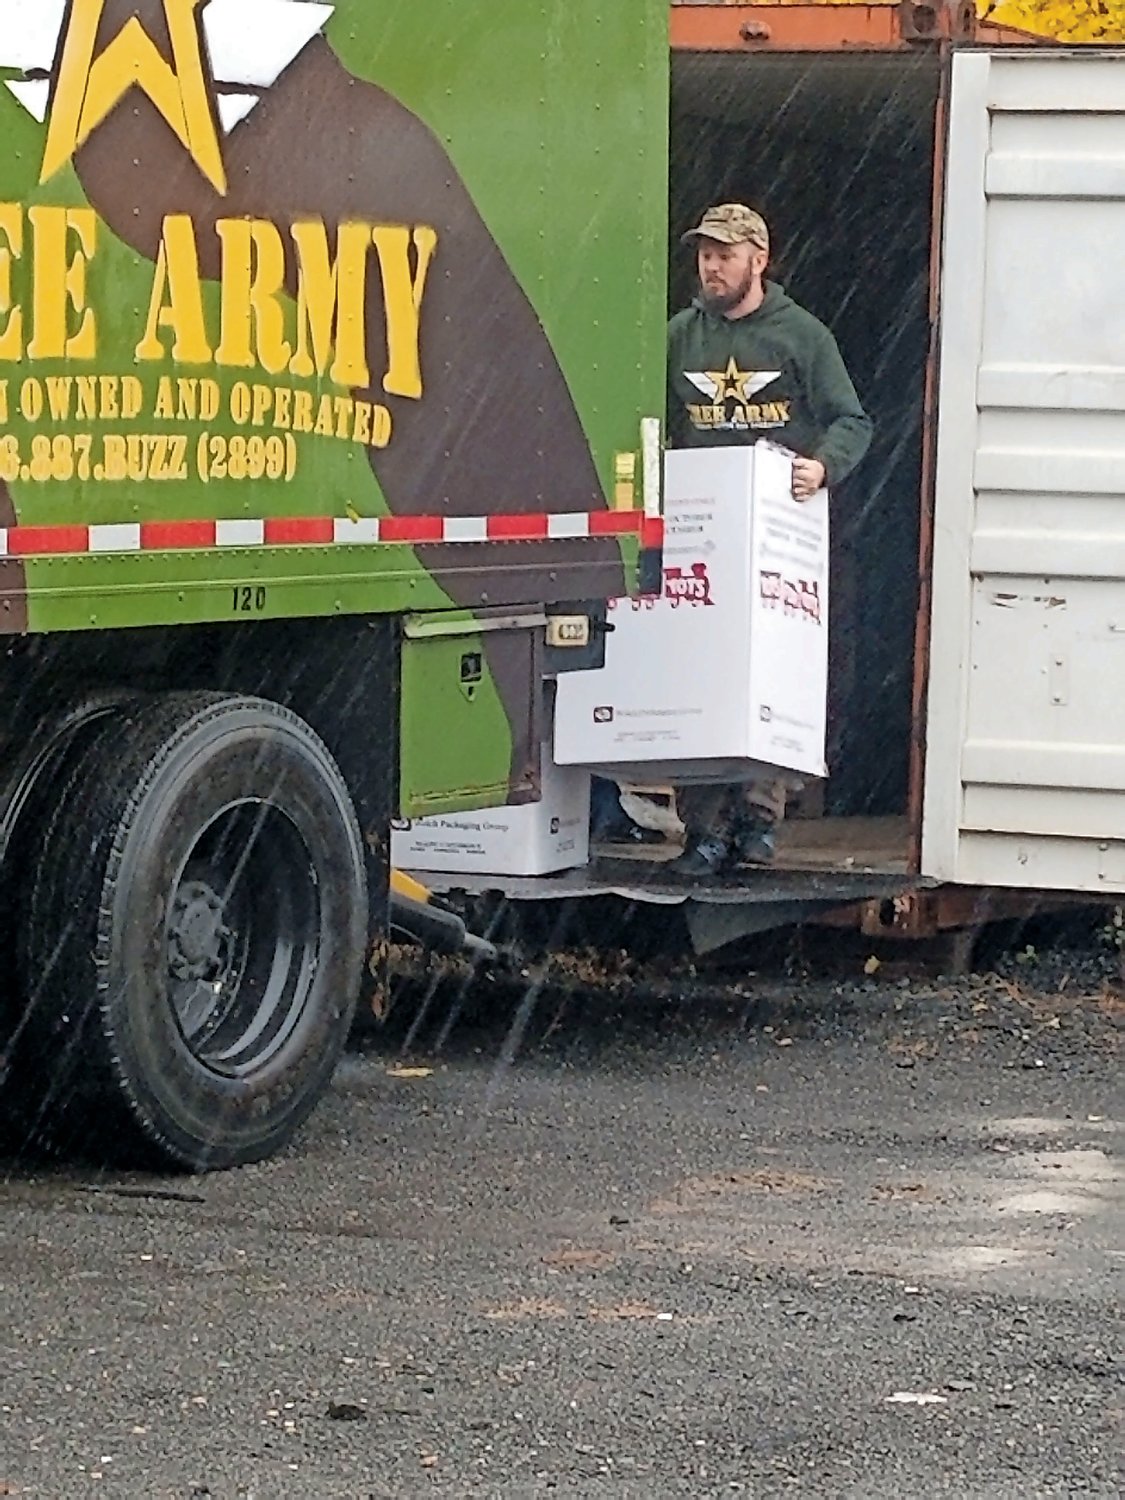 Tree Army, a company owned and operated by veterans, donates the use of its vehicles for the Marine Corps' Toys for Tots program.